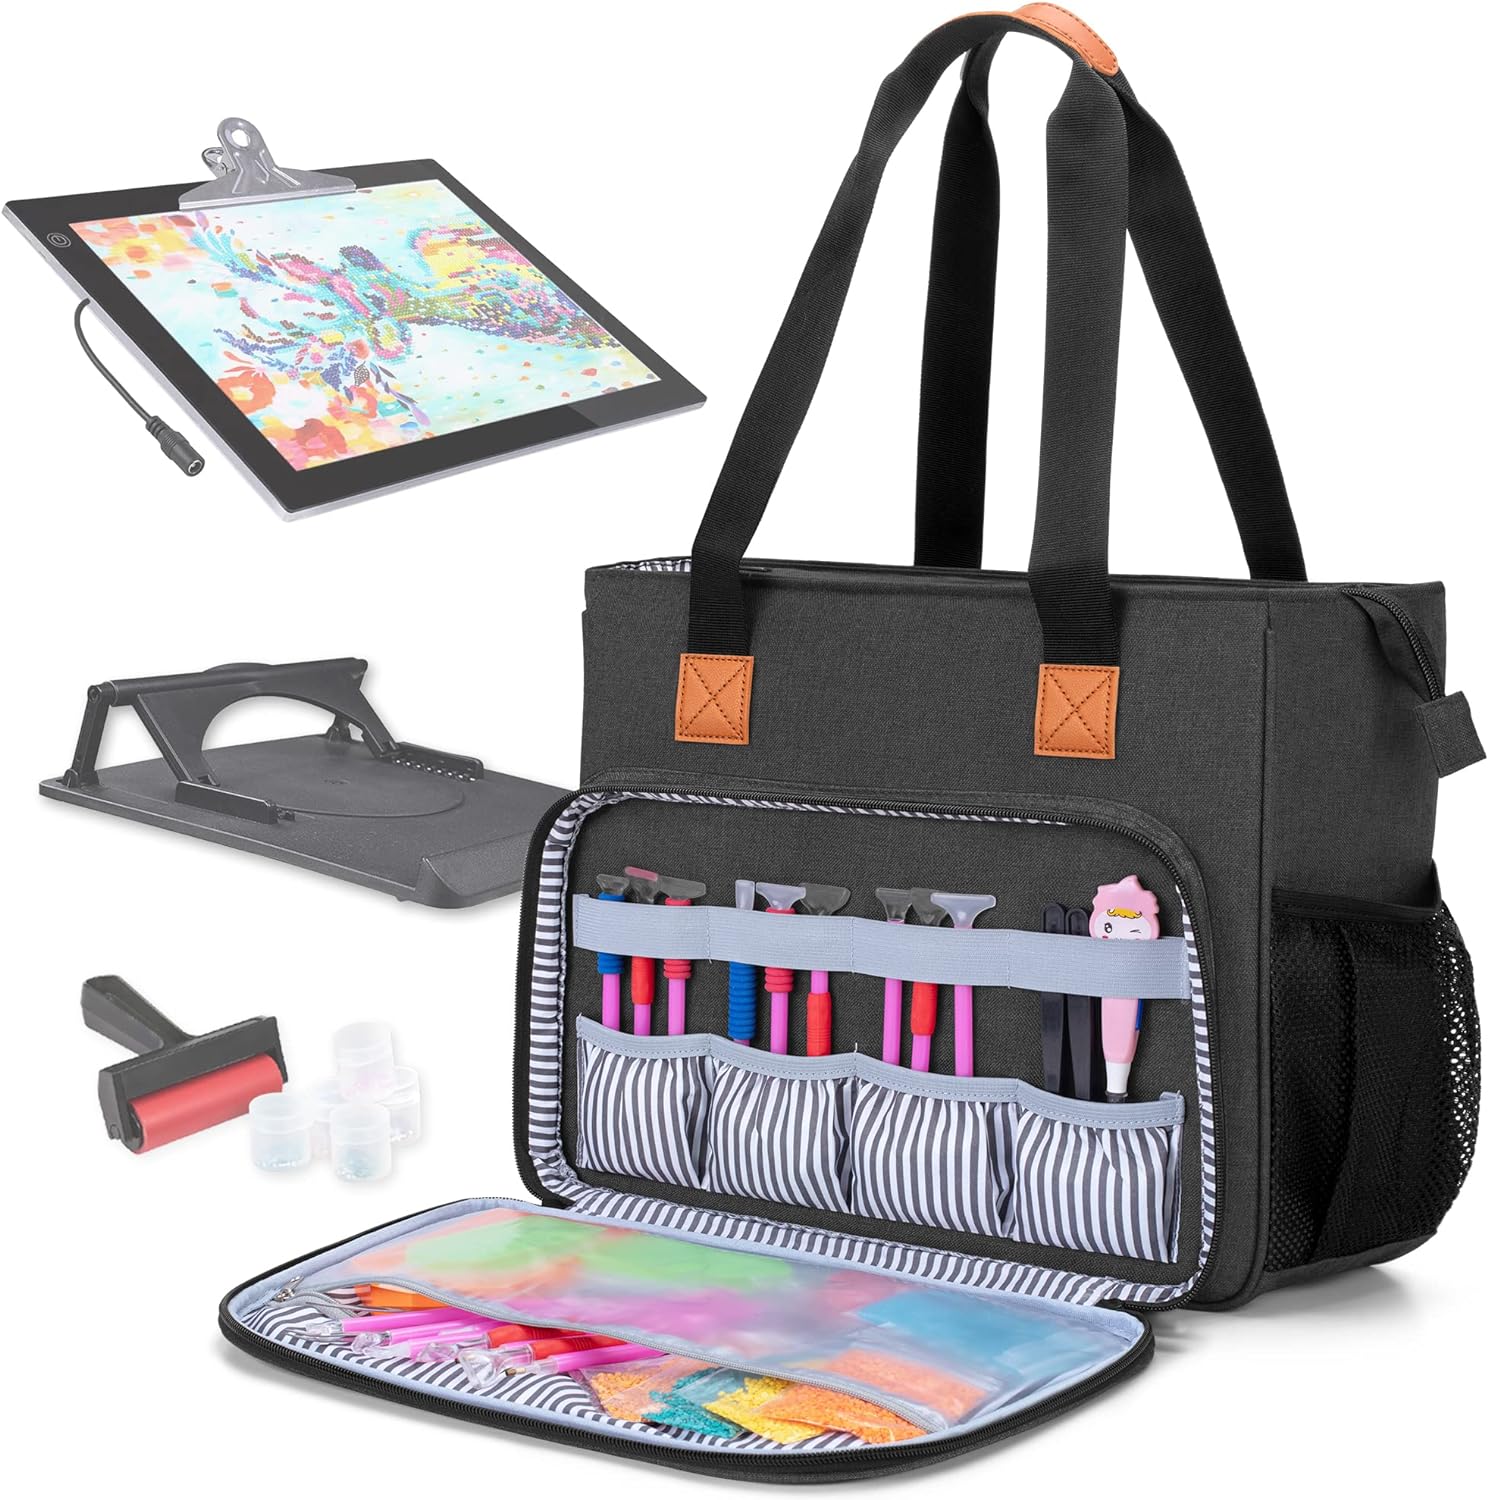 LUXJA Carrying Case for A4 Light Pad and Diamond Painting Accessories, Storage Bag for Diamond Painting Tools and Light Box (Fits for A4 Light Pad), Black (Bag Only)